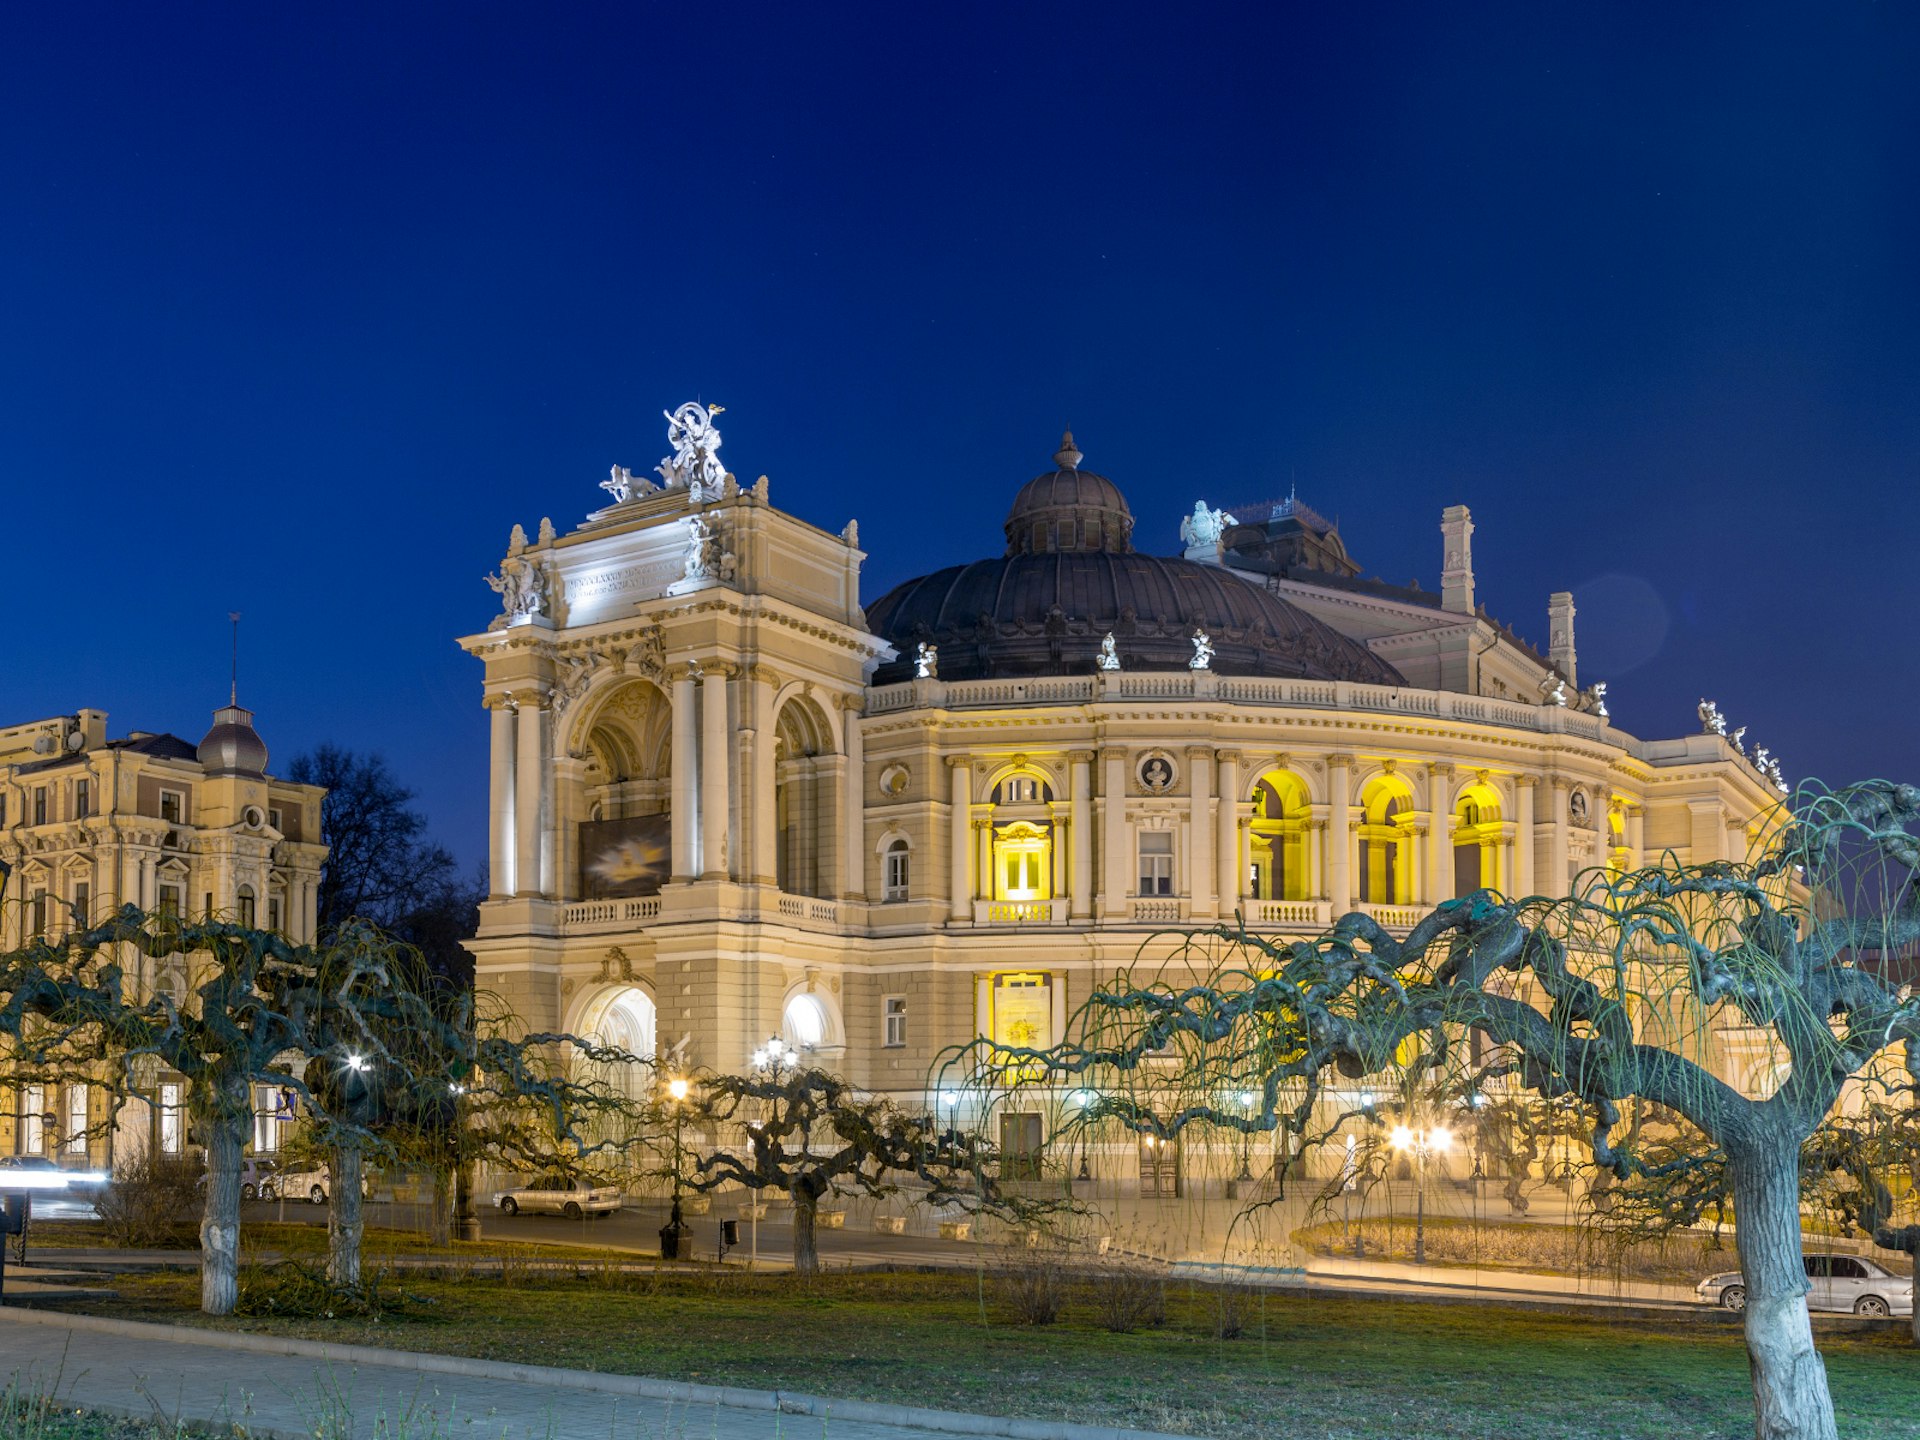 The building of Odesa Opera and Ballet Theatre lit up at night